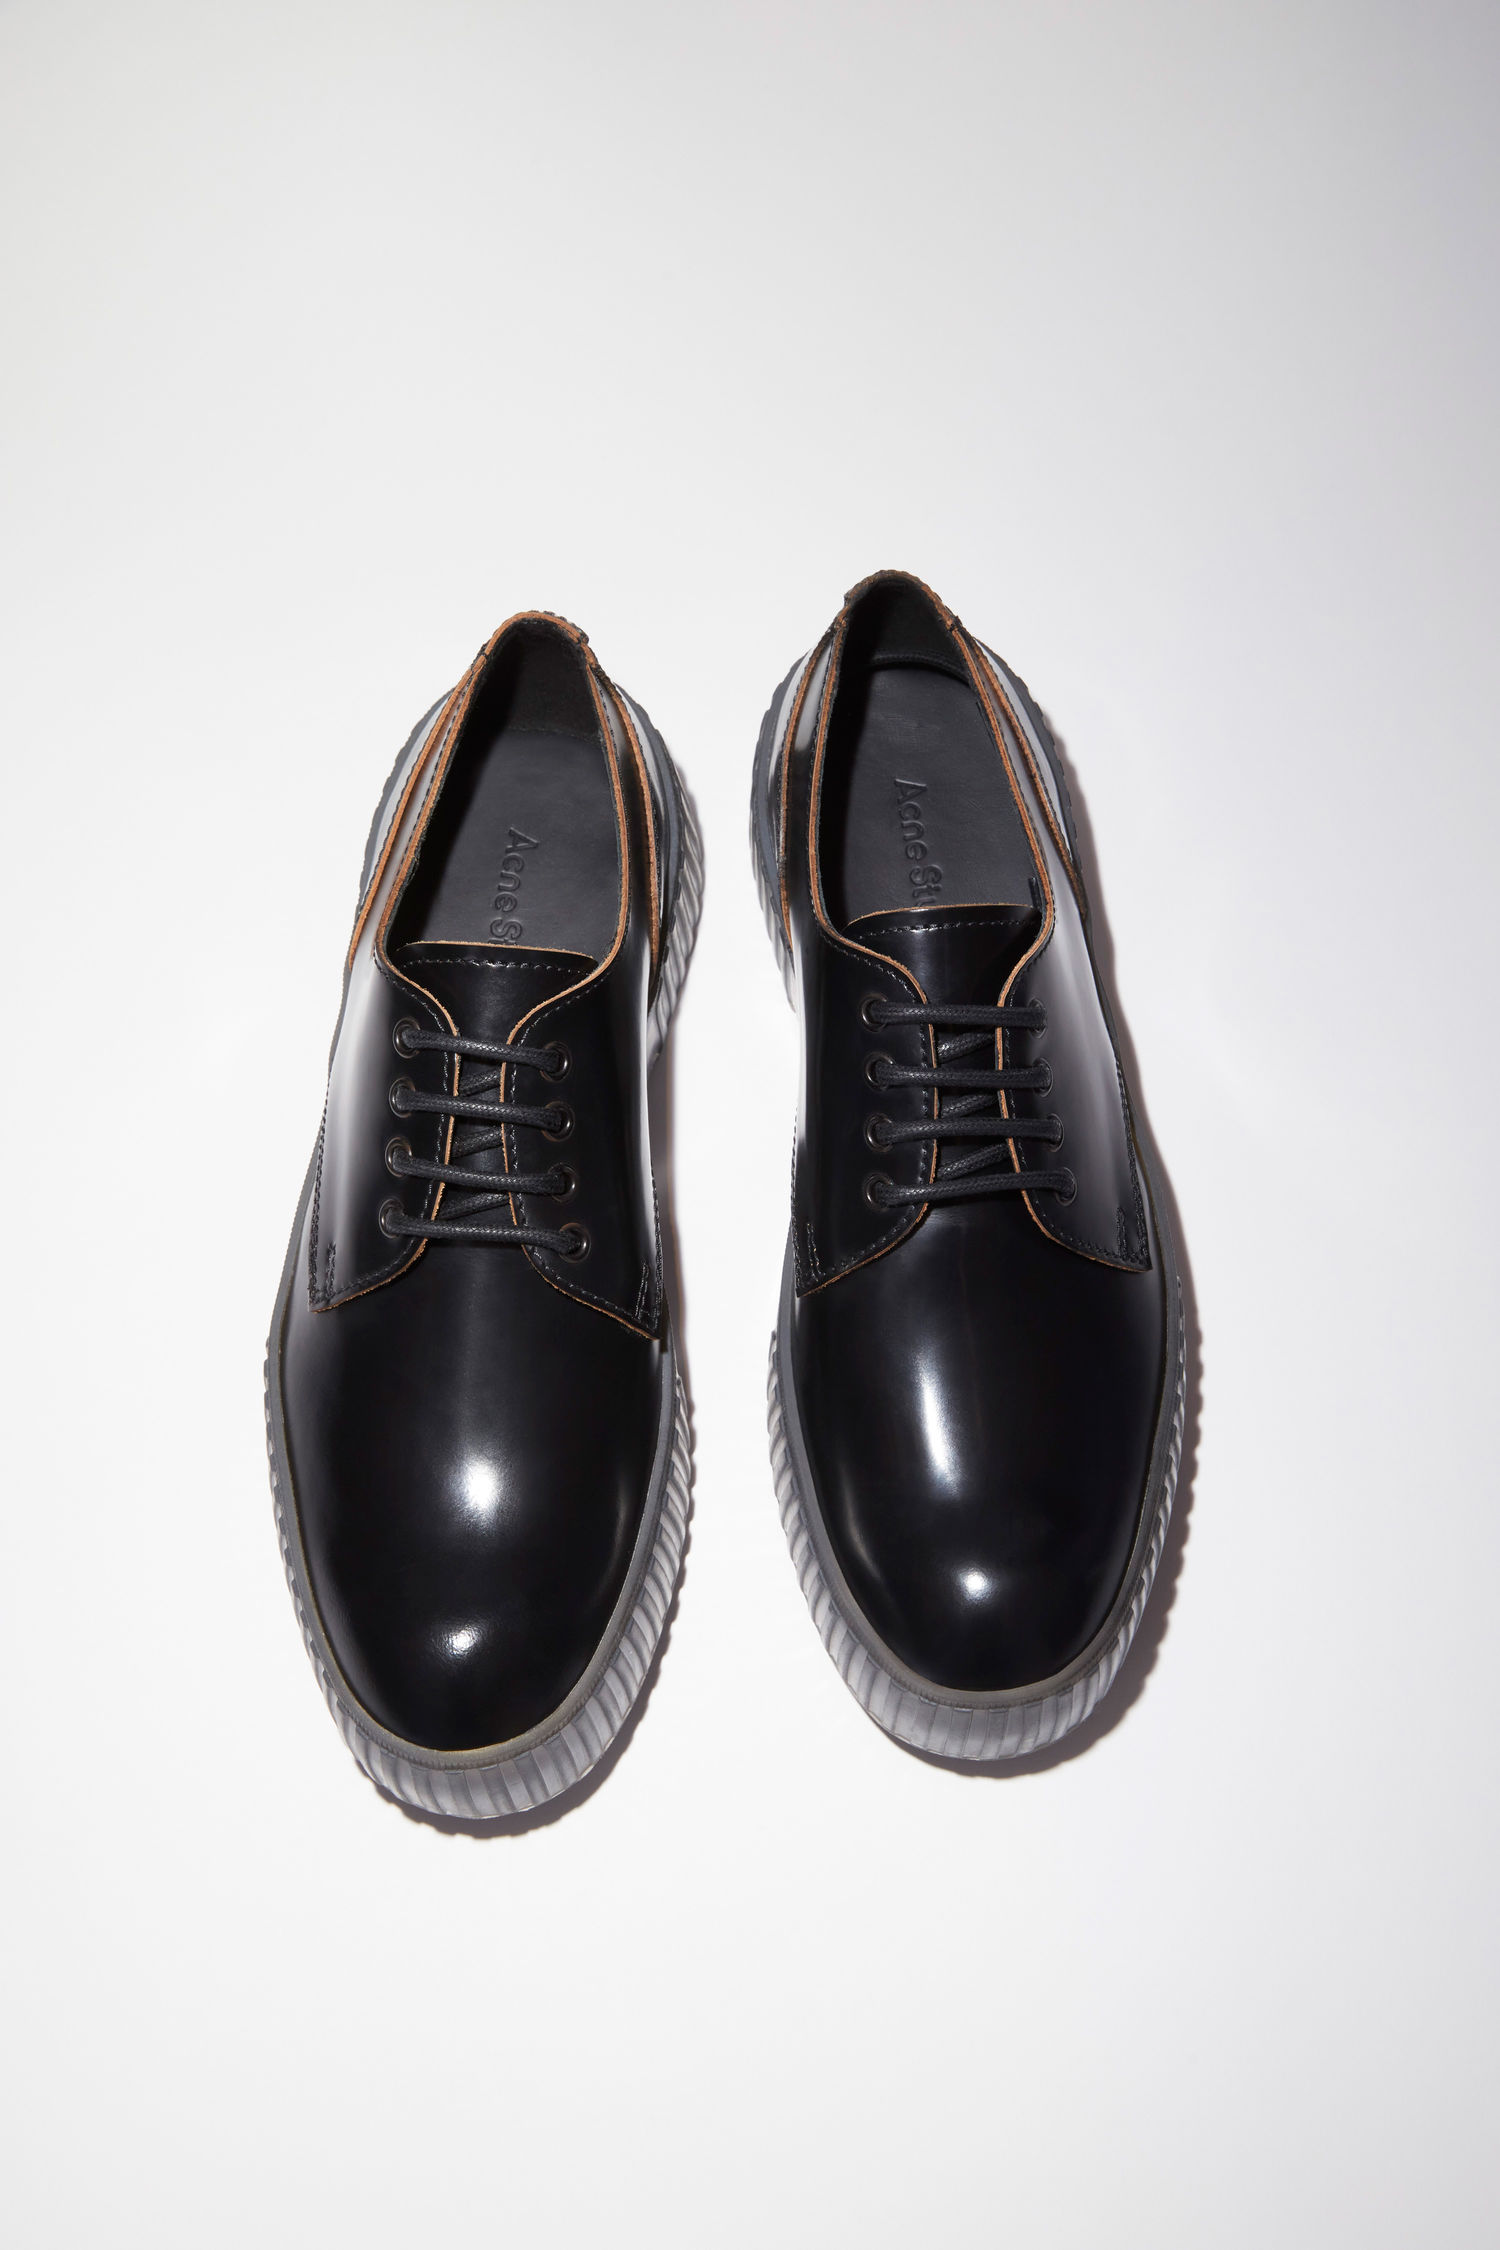 Buy > leather derby shoes > in stock